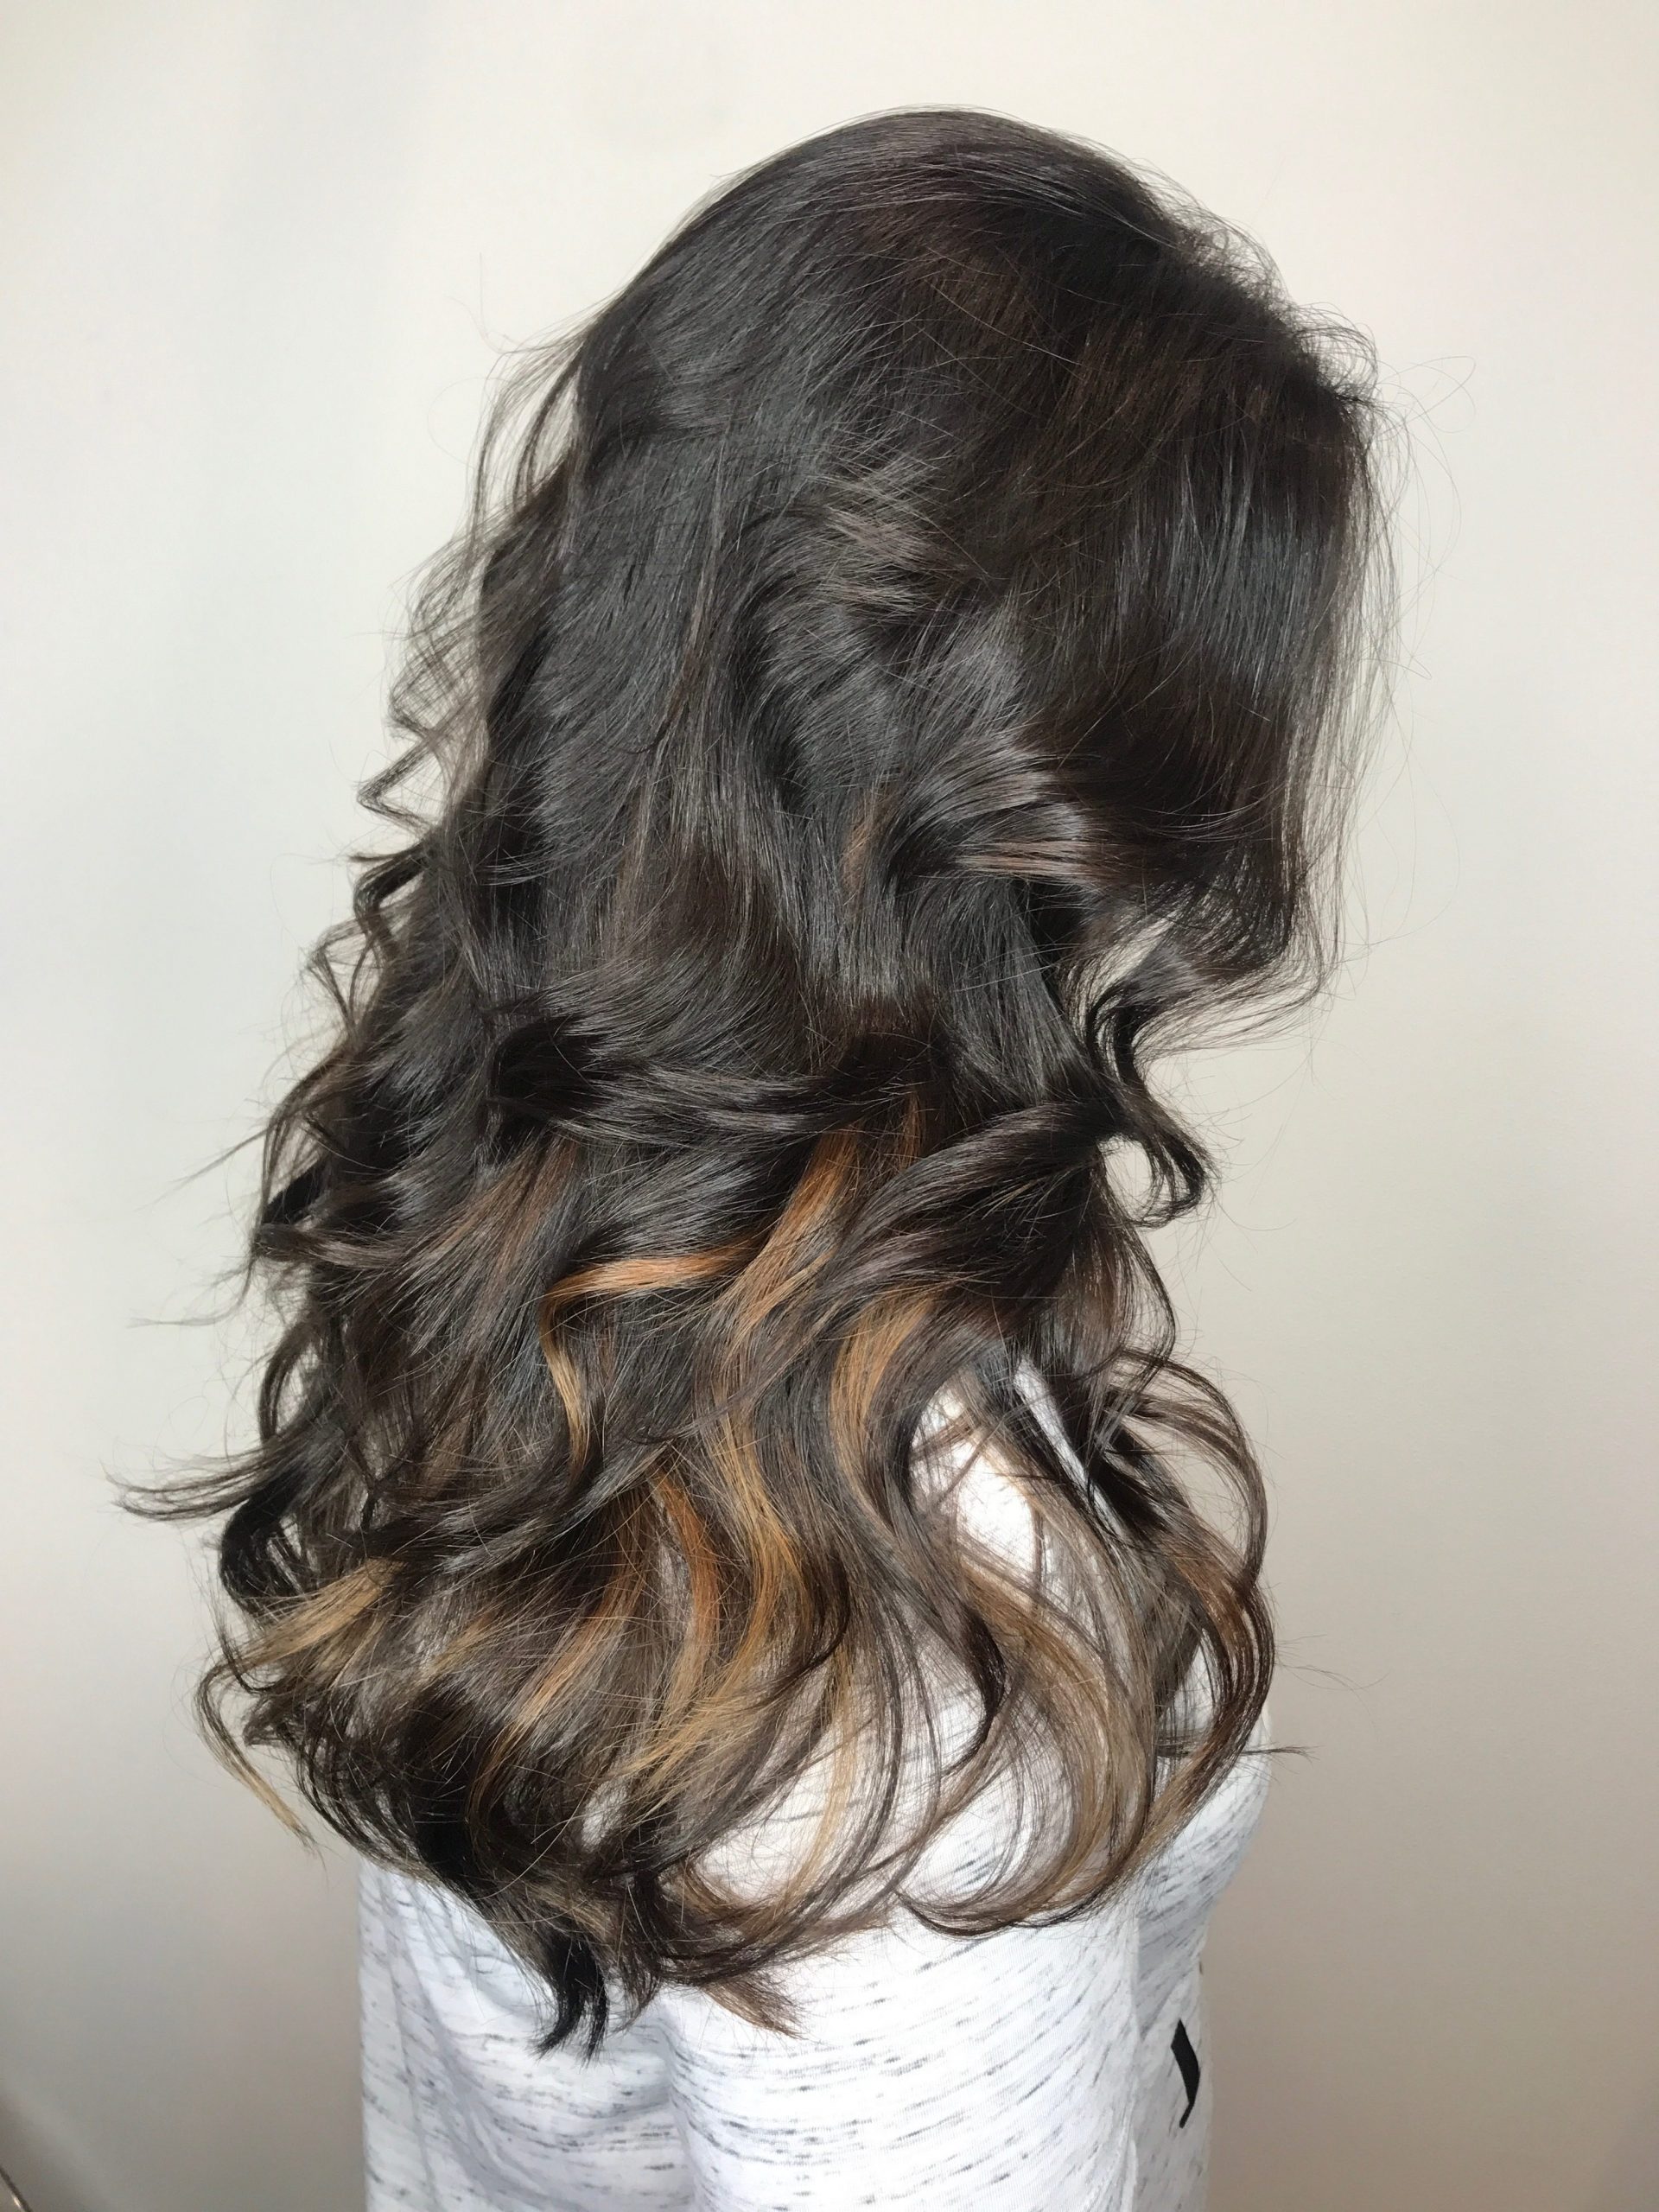 Hair Salon in Baton Rouge | Cuts, Color, Extensions, Microblading & More